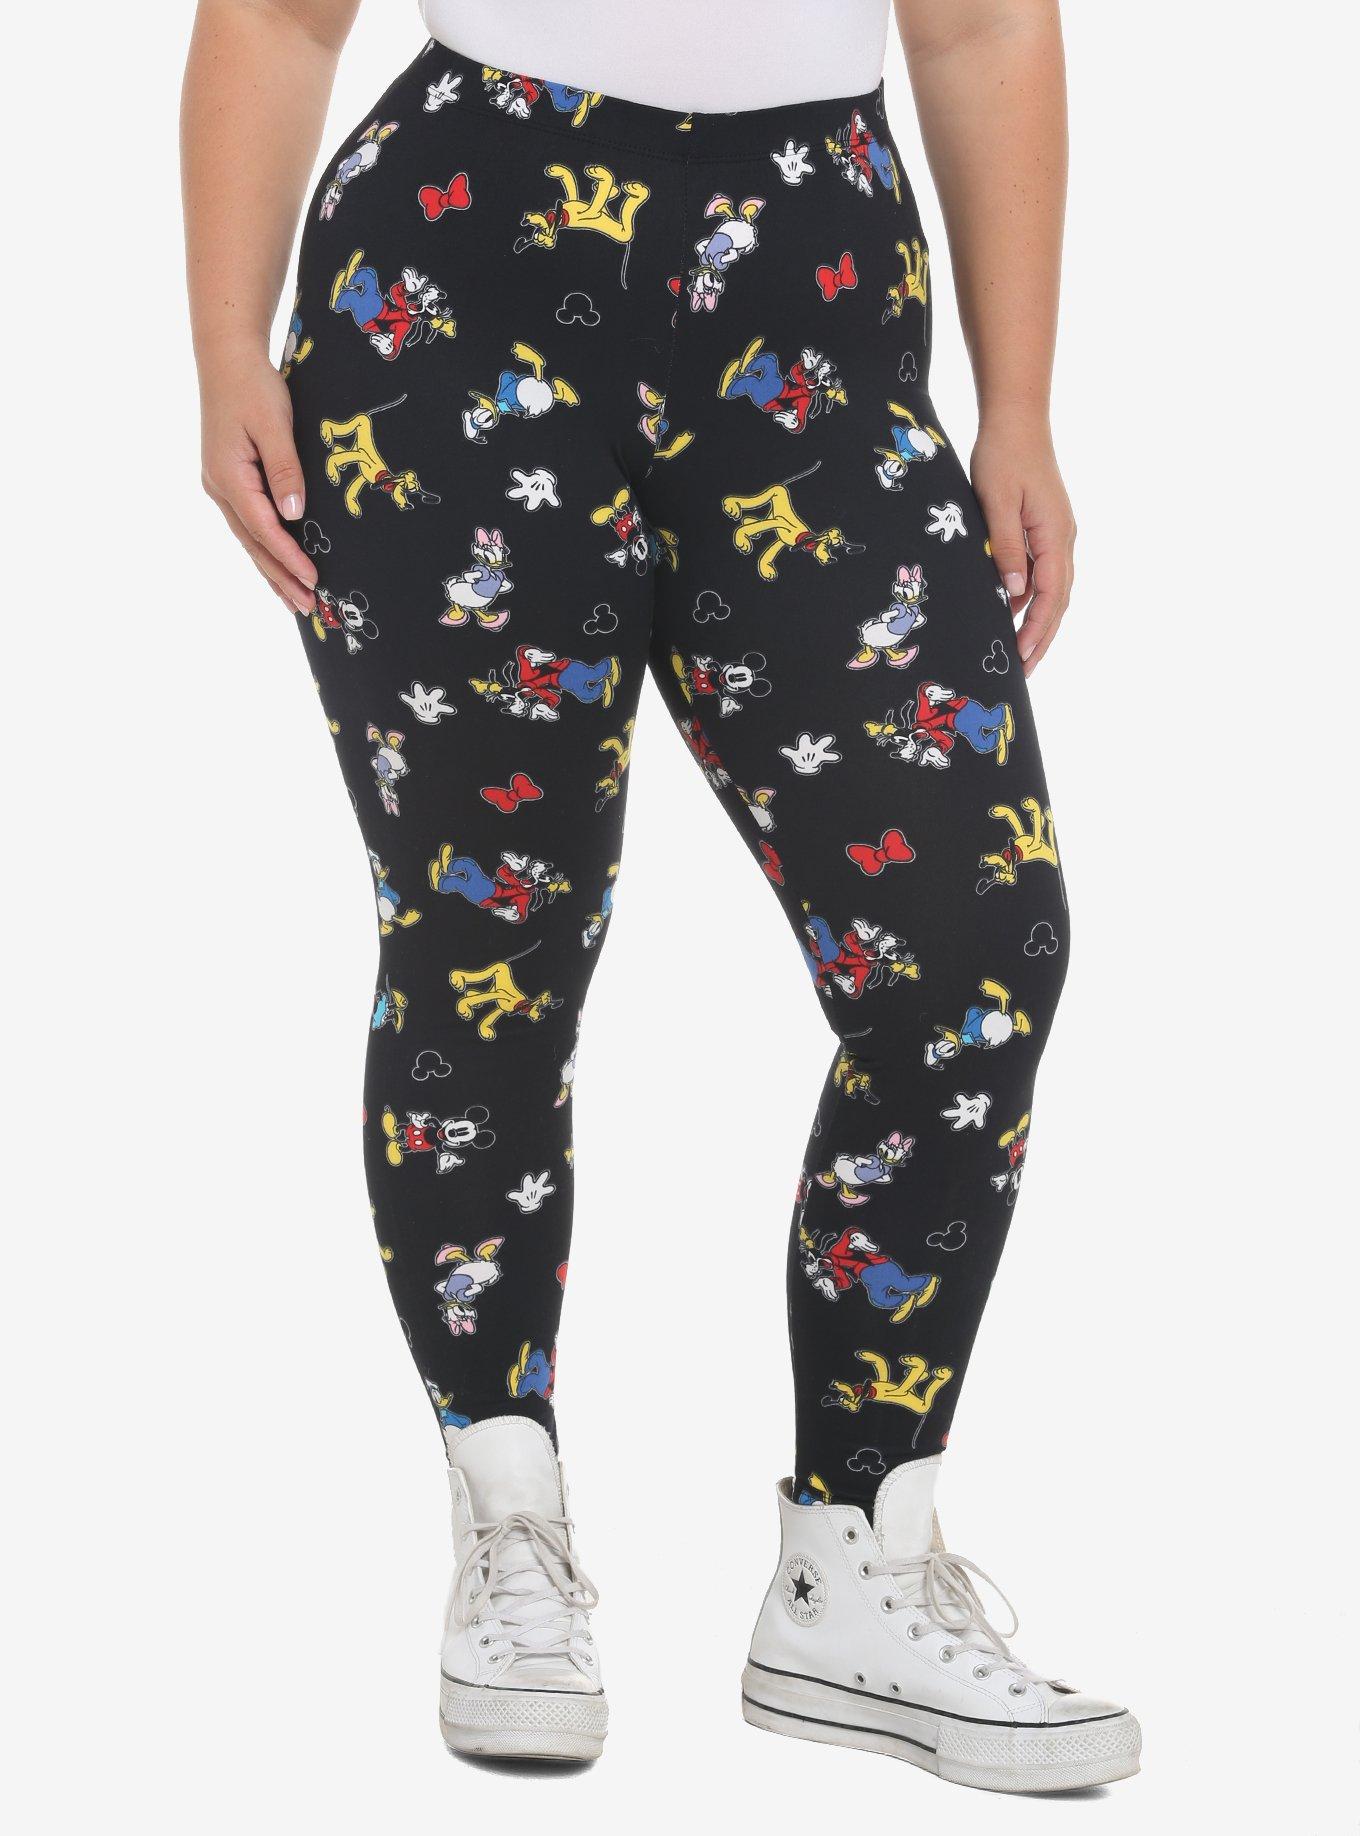 Chip and Dale Leggings  Chip and Dale Pants Disney Leggings sold